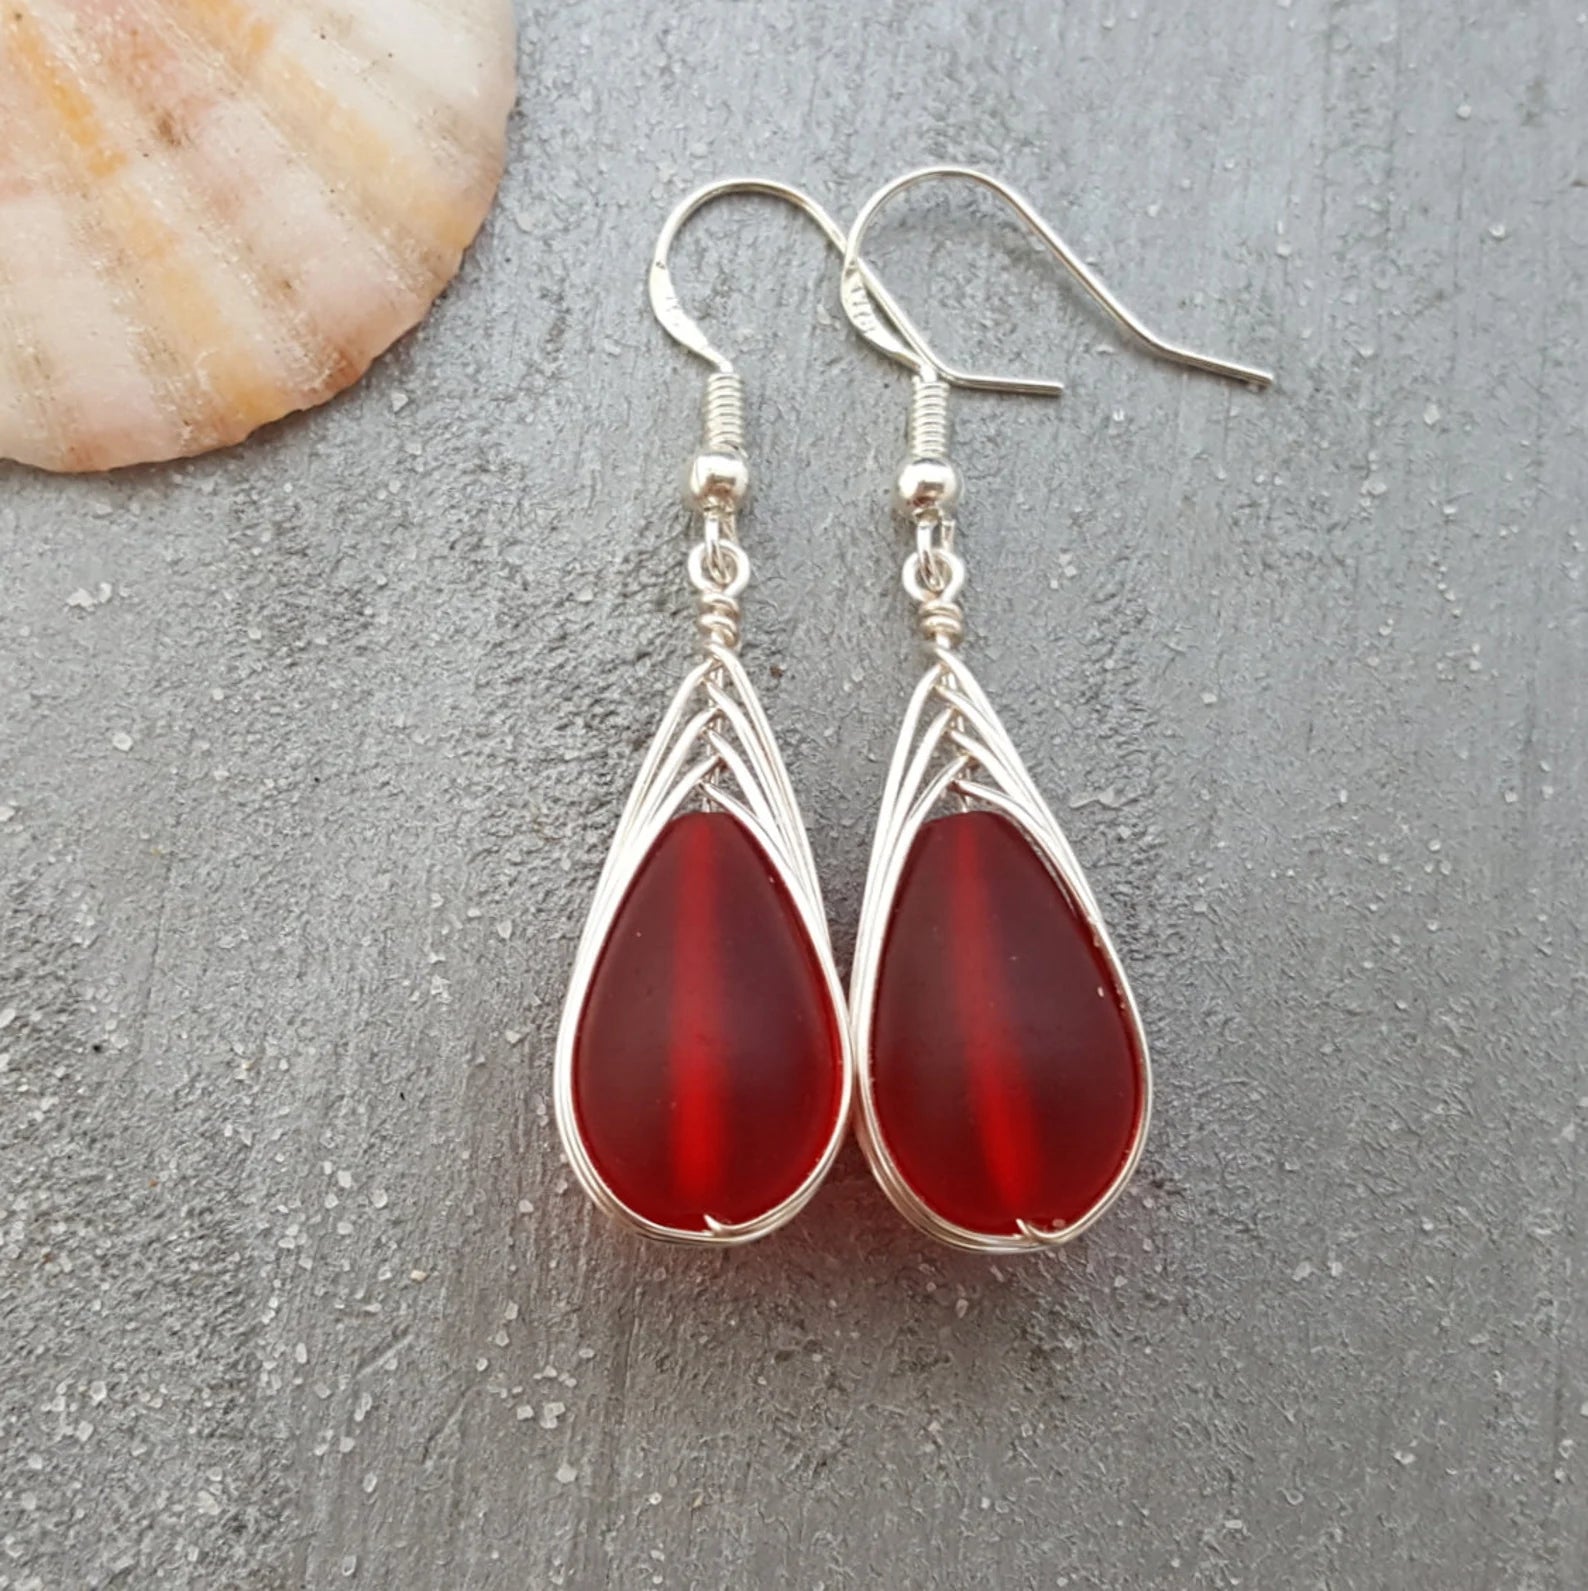 SOLD** Let's let go of blood diamonds… And instead focus on the beauty of  blood red sea glass! Traditionally, gold oxide would have... | Instagram